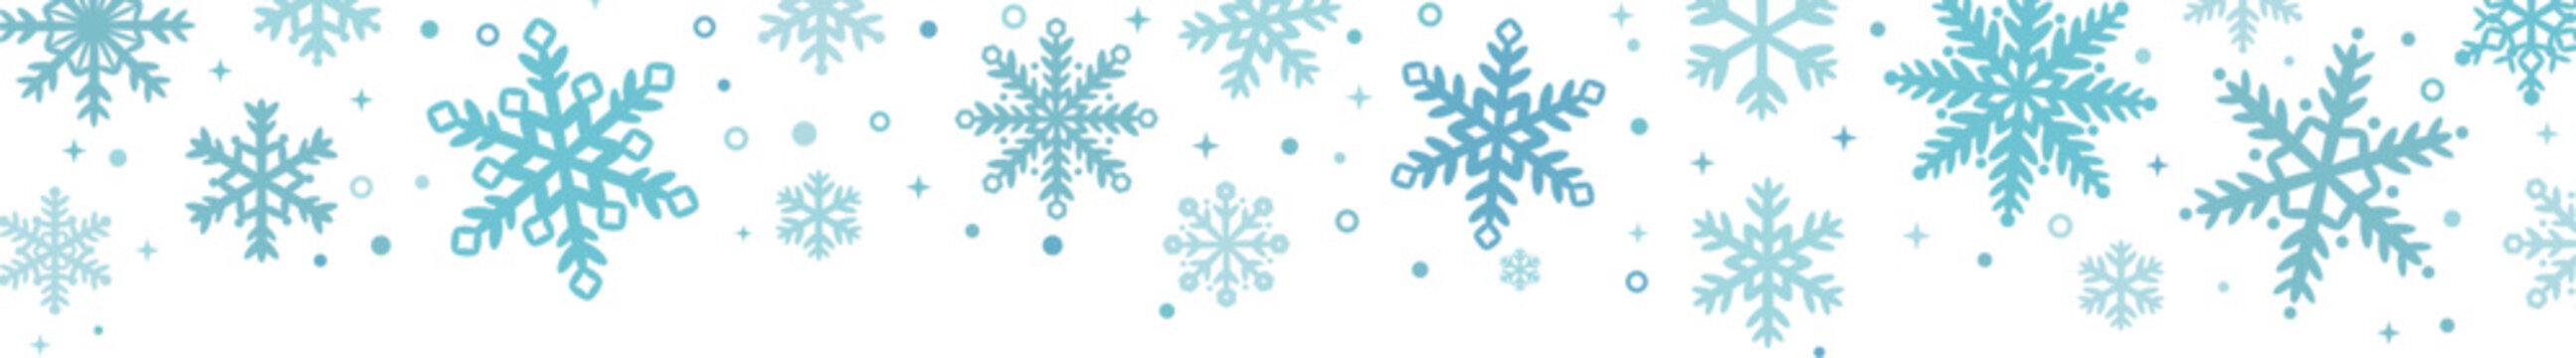 Snow fall greeting banner with blue hand drawn snow flake elements, vector border for the winter holidays, isolated clip art